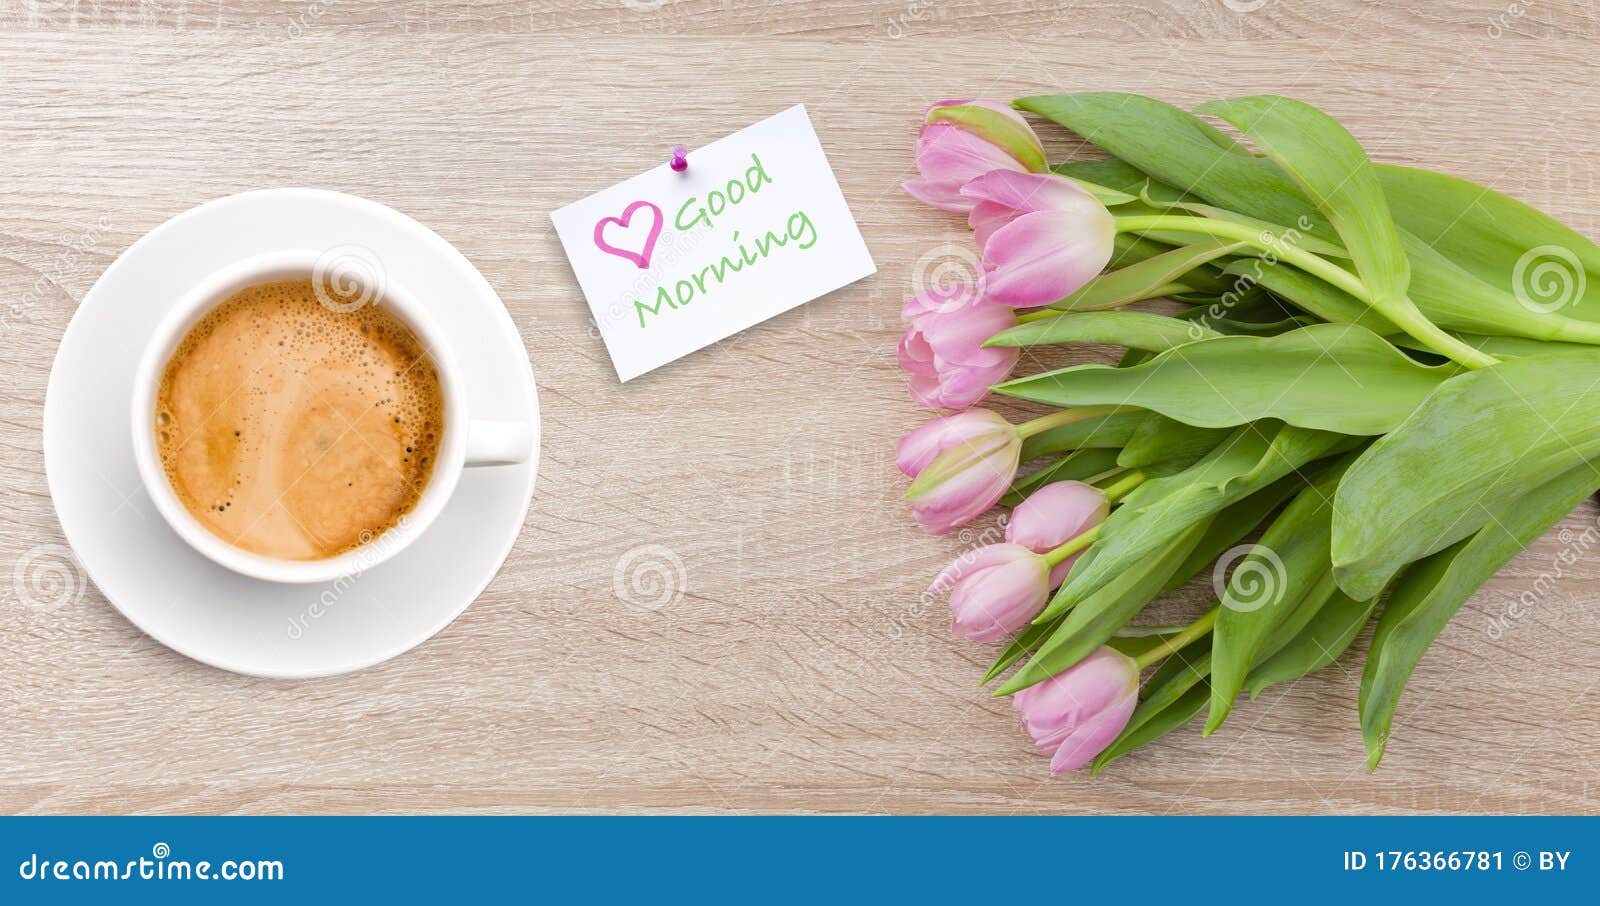 Good Morning` Greeting with Flowers and Coffee Stock Image - Image ...